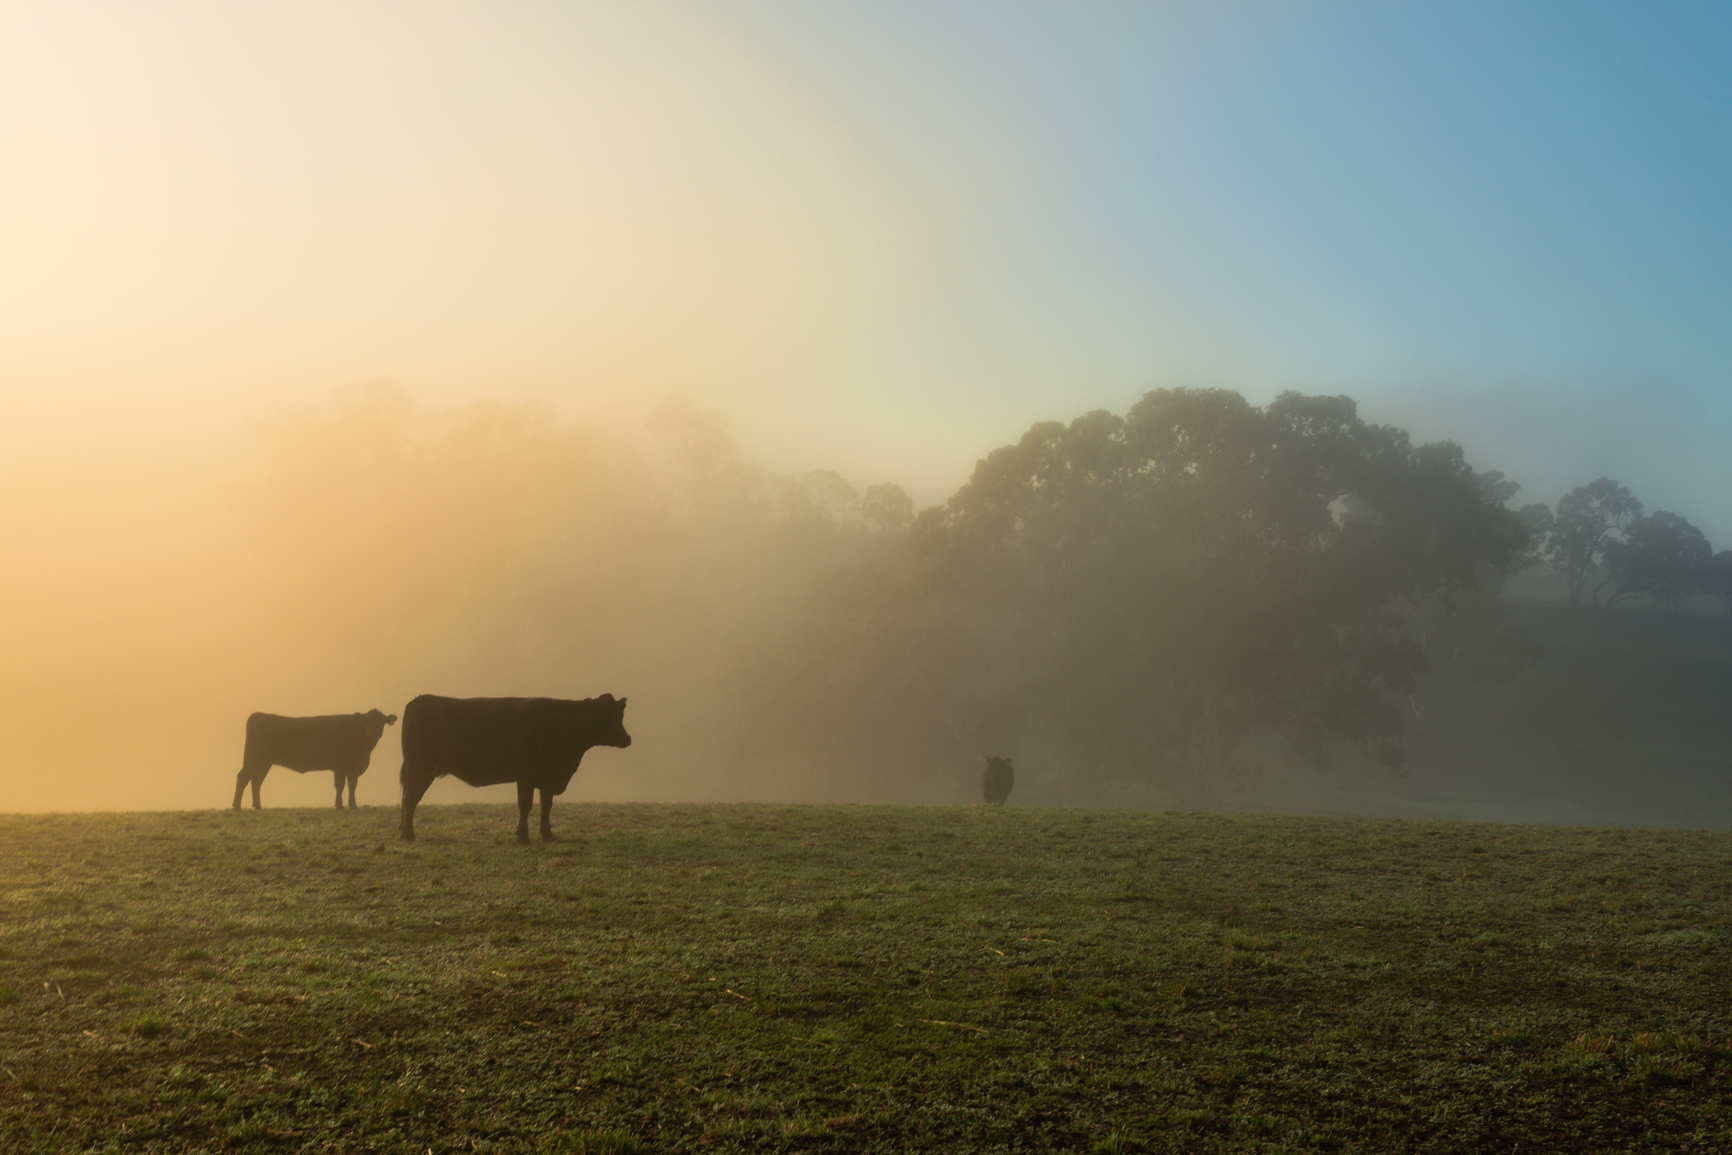 Morning mist on the farm, with cows in silhouette